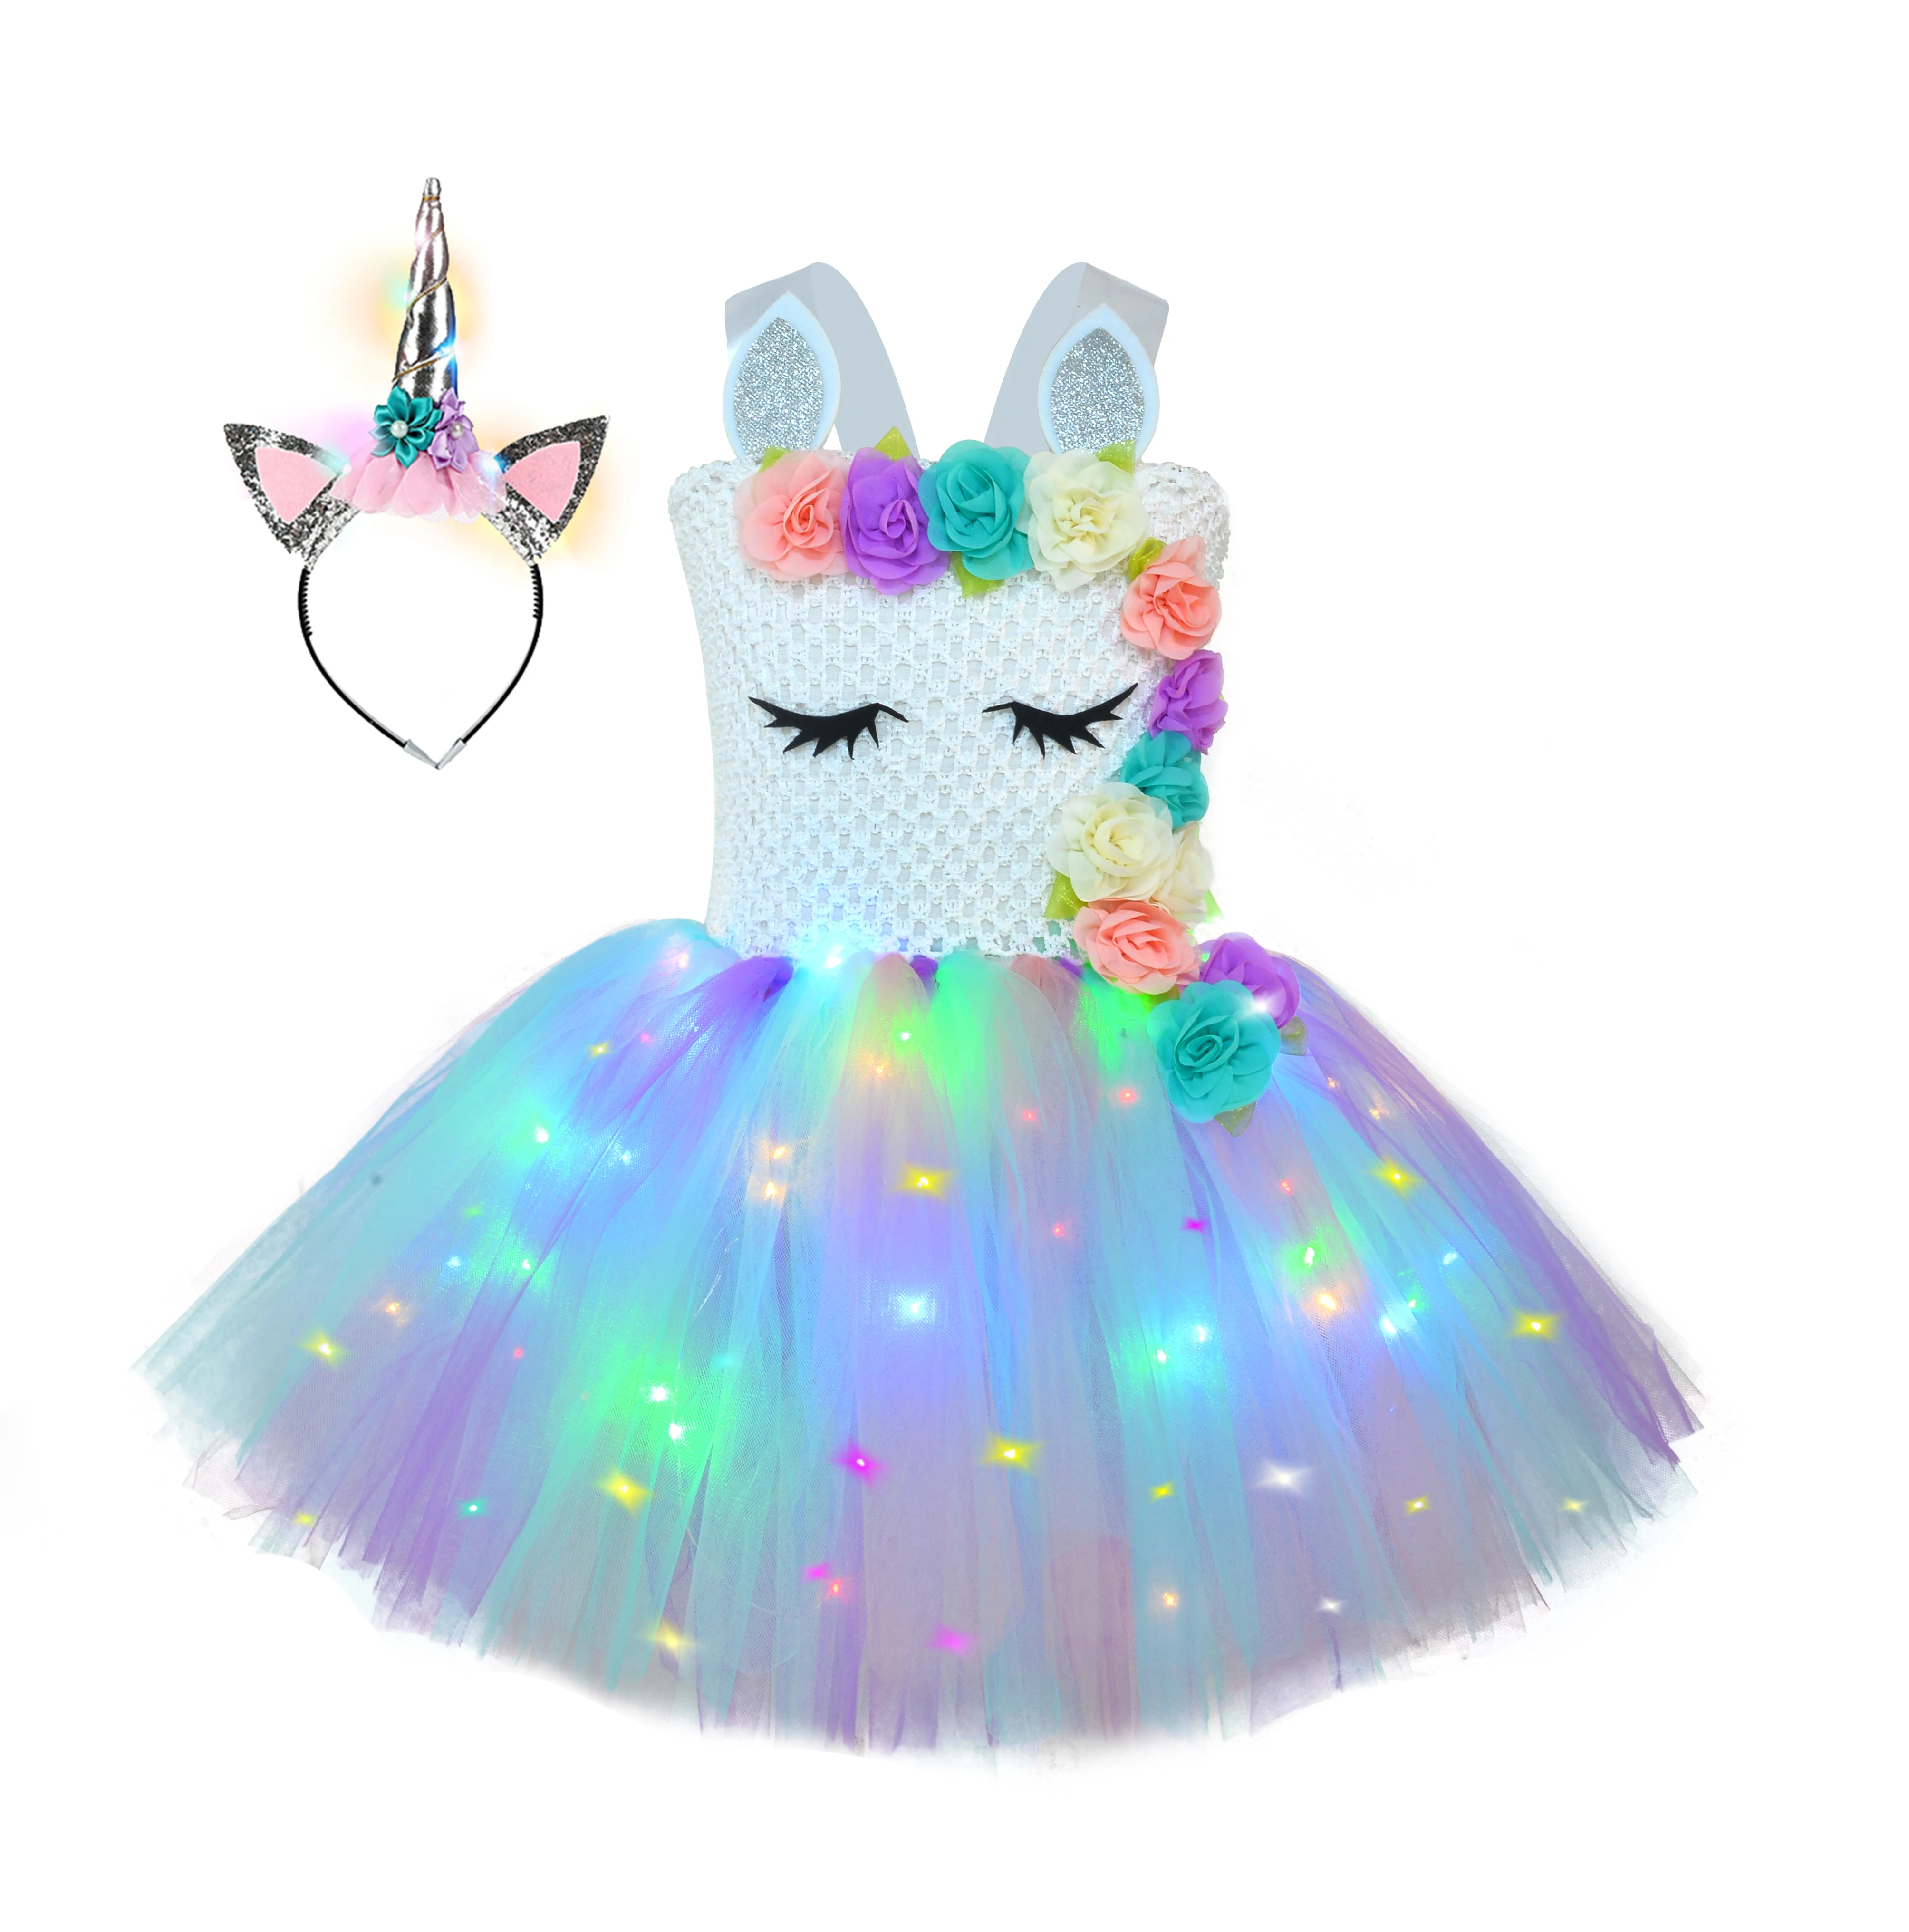 

New Design Children Party Gown Ball Rainbow Led Light 12 Flowers Girl Tulle Unicorn Tutu Dress With Headband, As picture shows